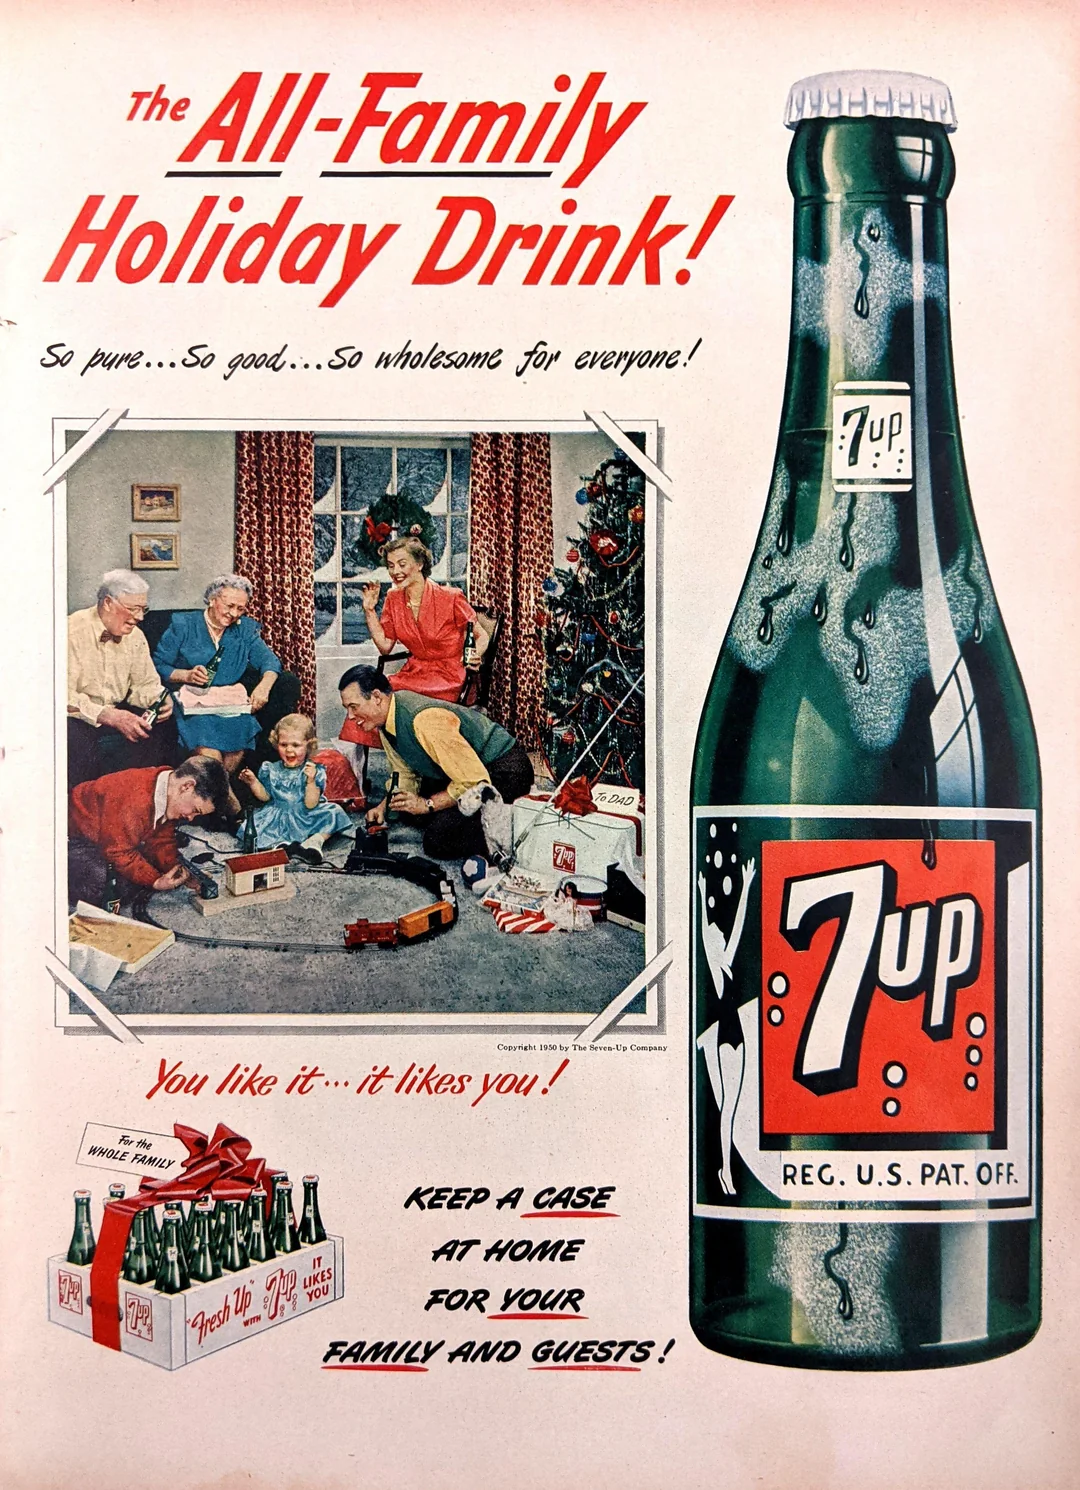 the All-Family Holiday Drink! So pure... So good... So wholesome for everyone!